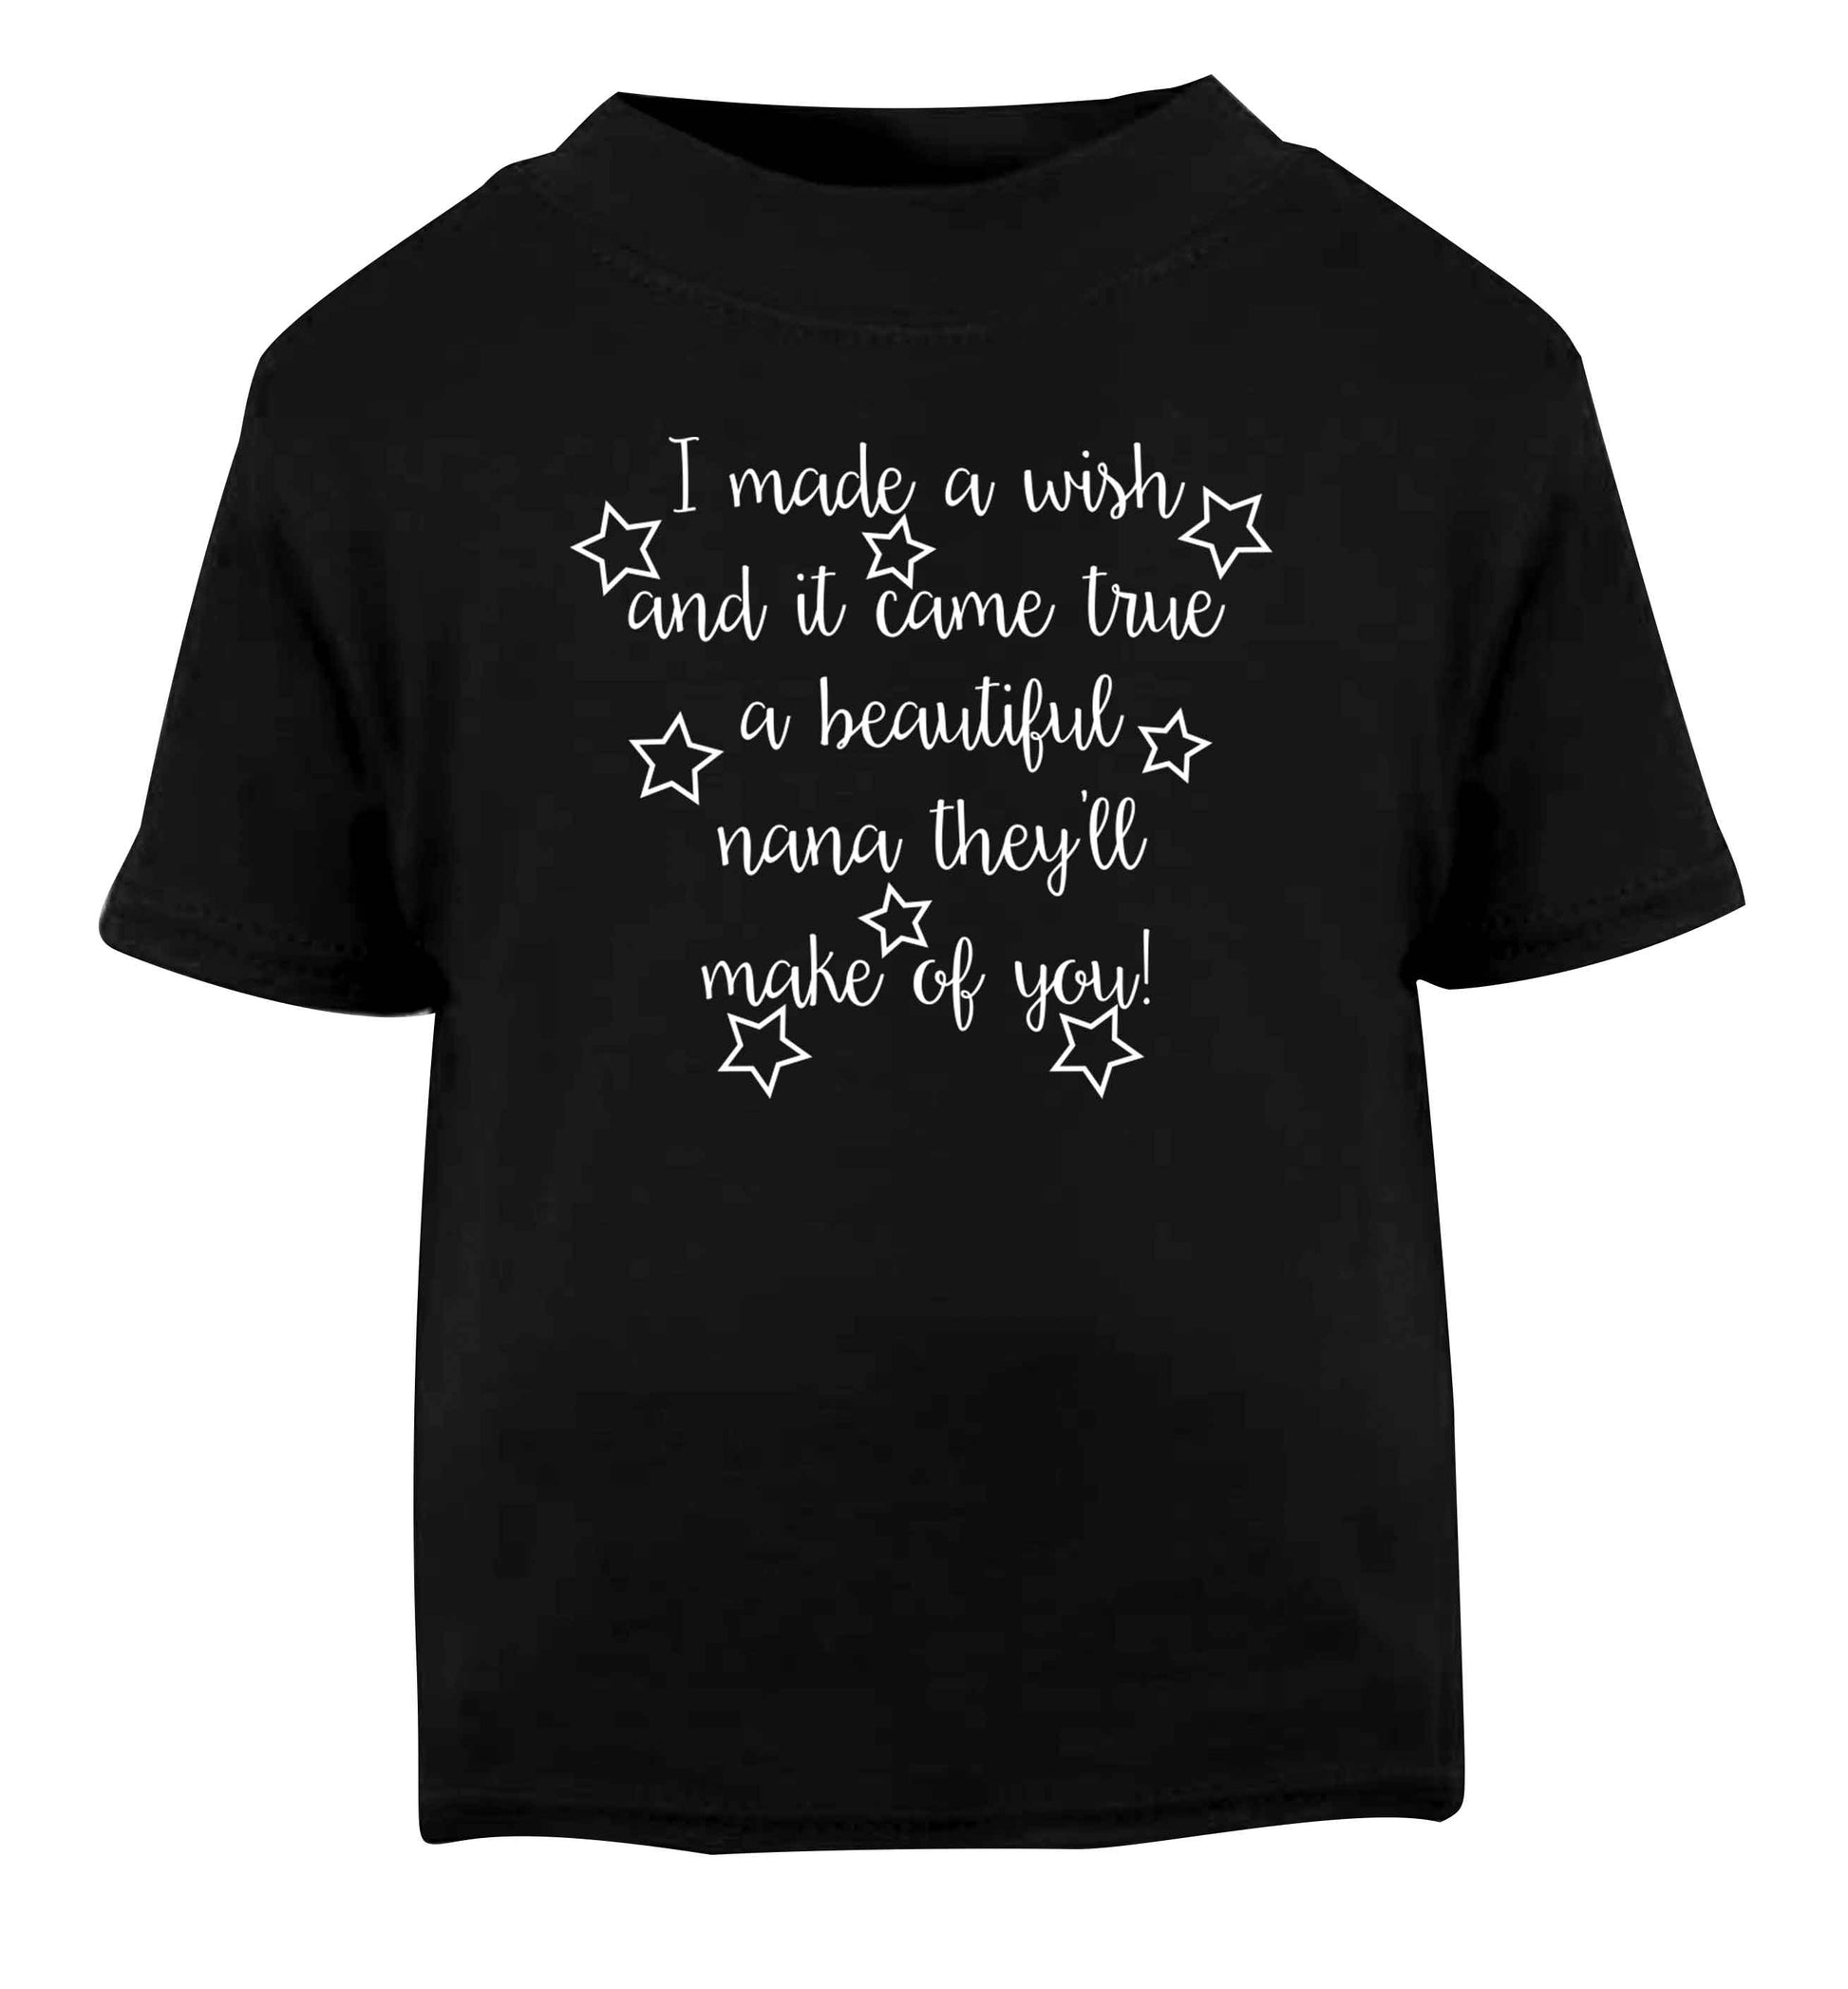 I made a wish and it came true a beautiful nana they'll make of you! Black Baby Toddler Tshirt 2 years